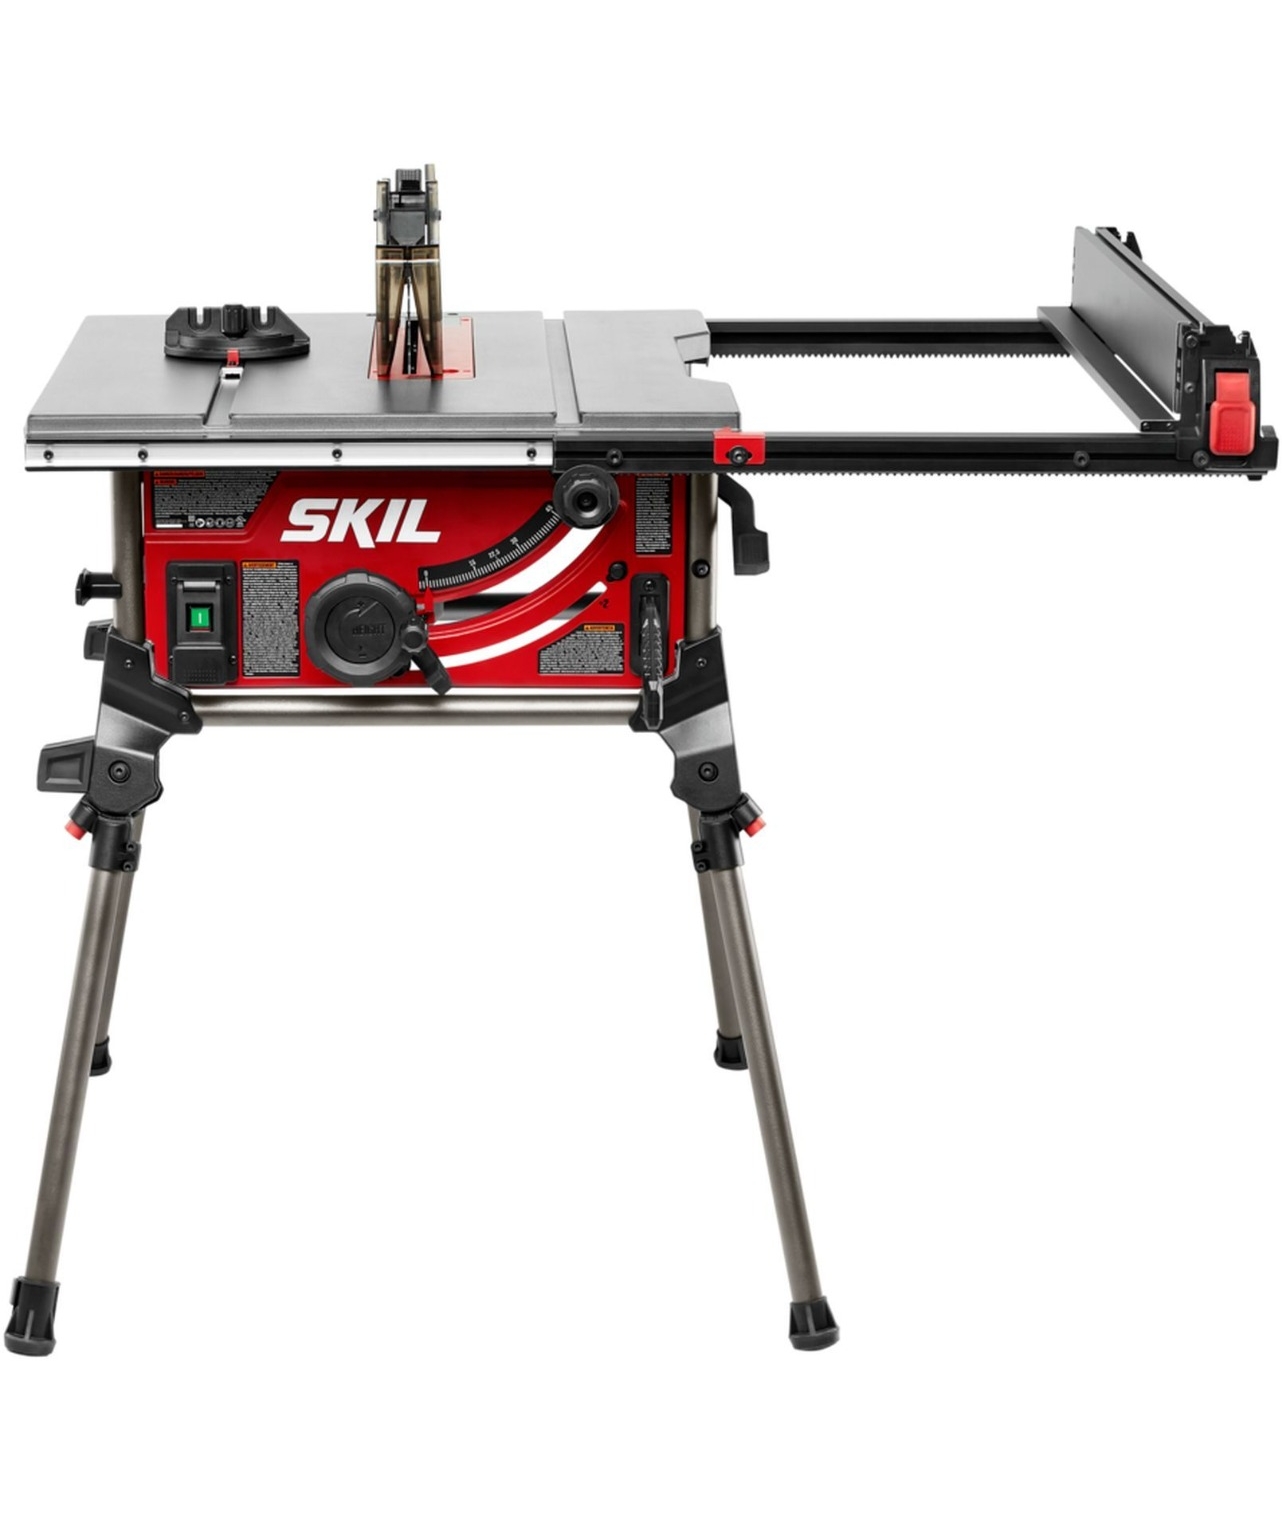 SKIL TS6307-00 15-Amp 10" Portable Table Saw - $299 at ToolNut